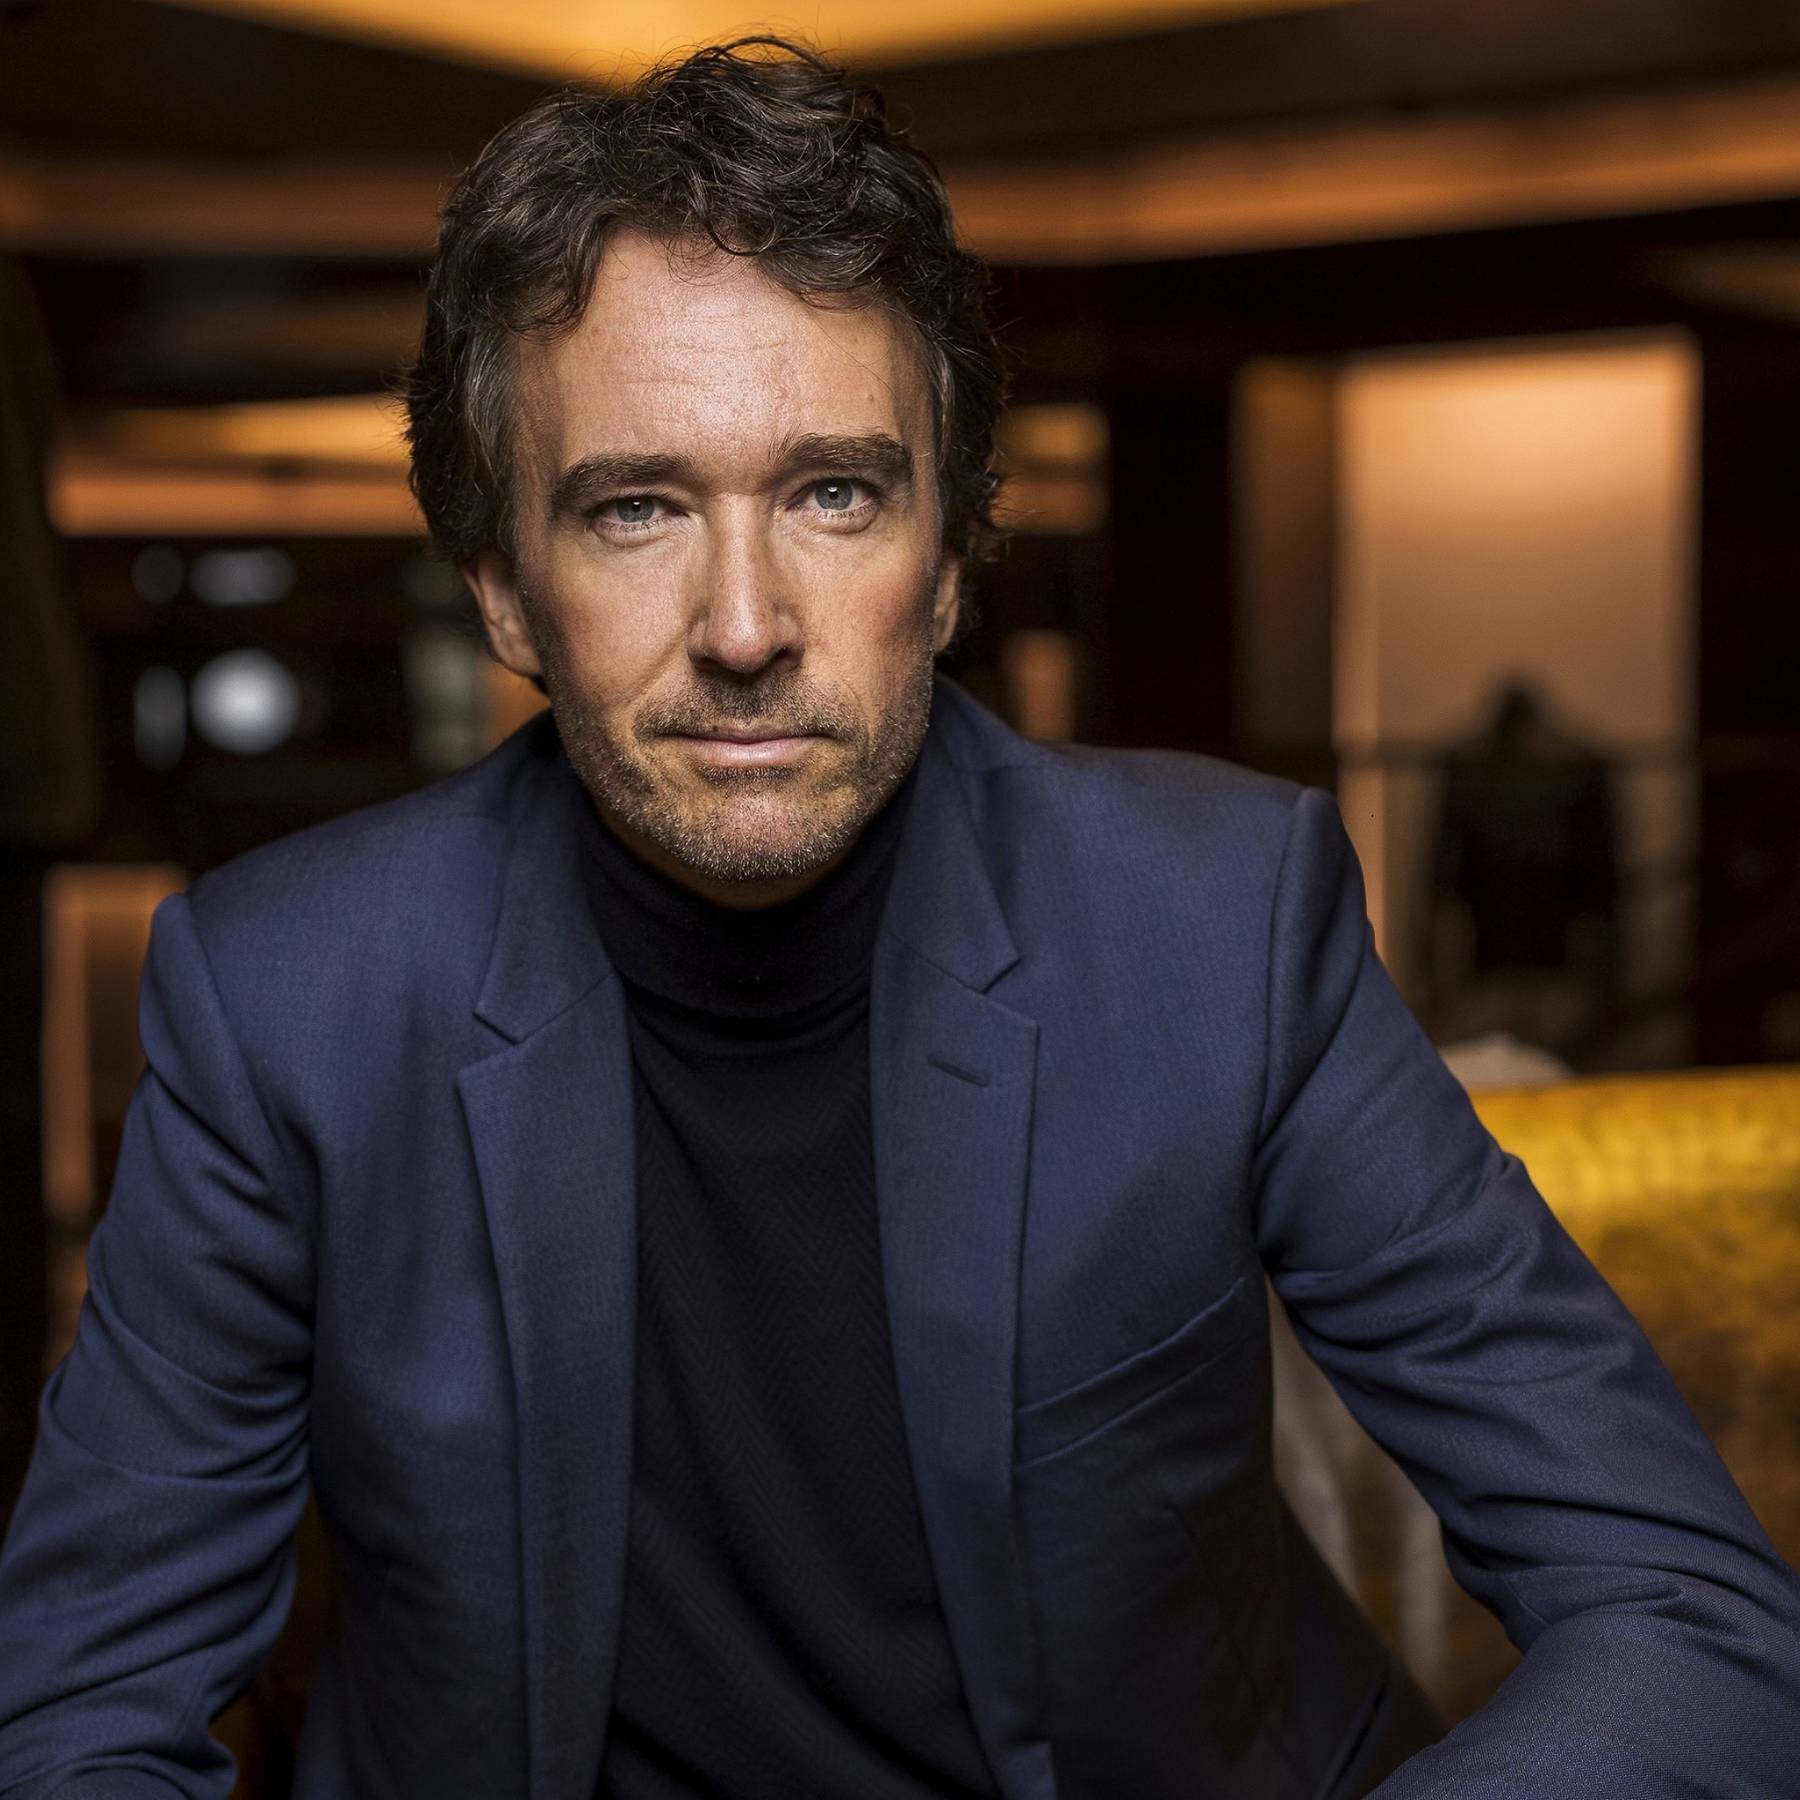 Antoine Arnault Becomes CEO of LVMH Holding Company